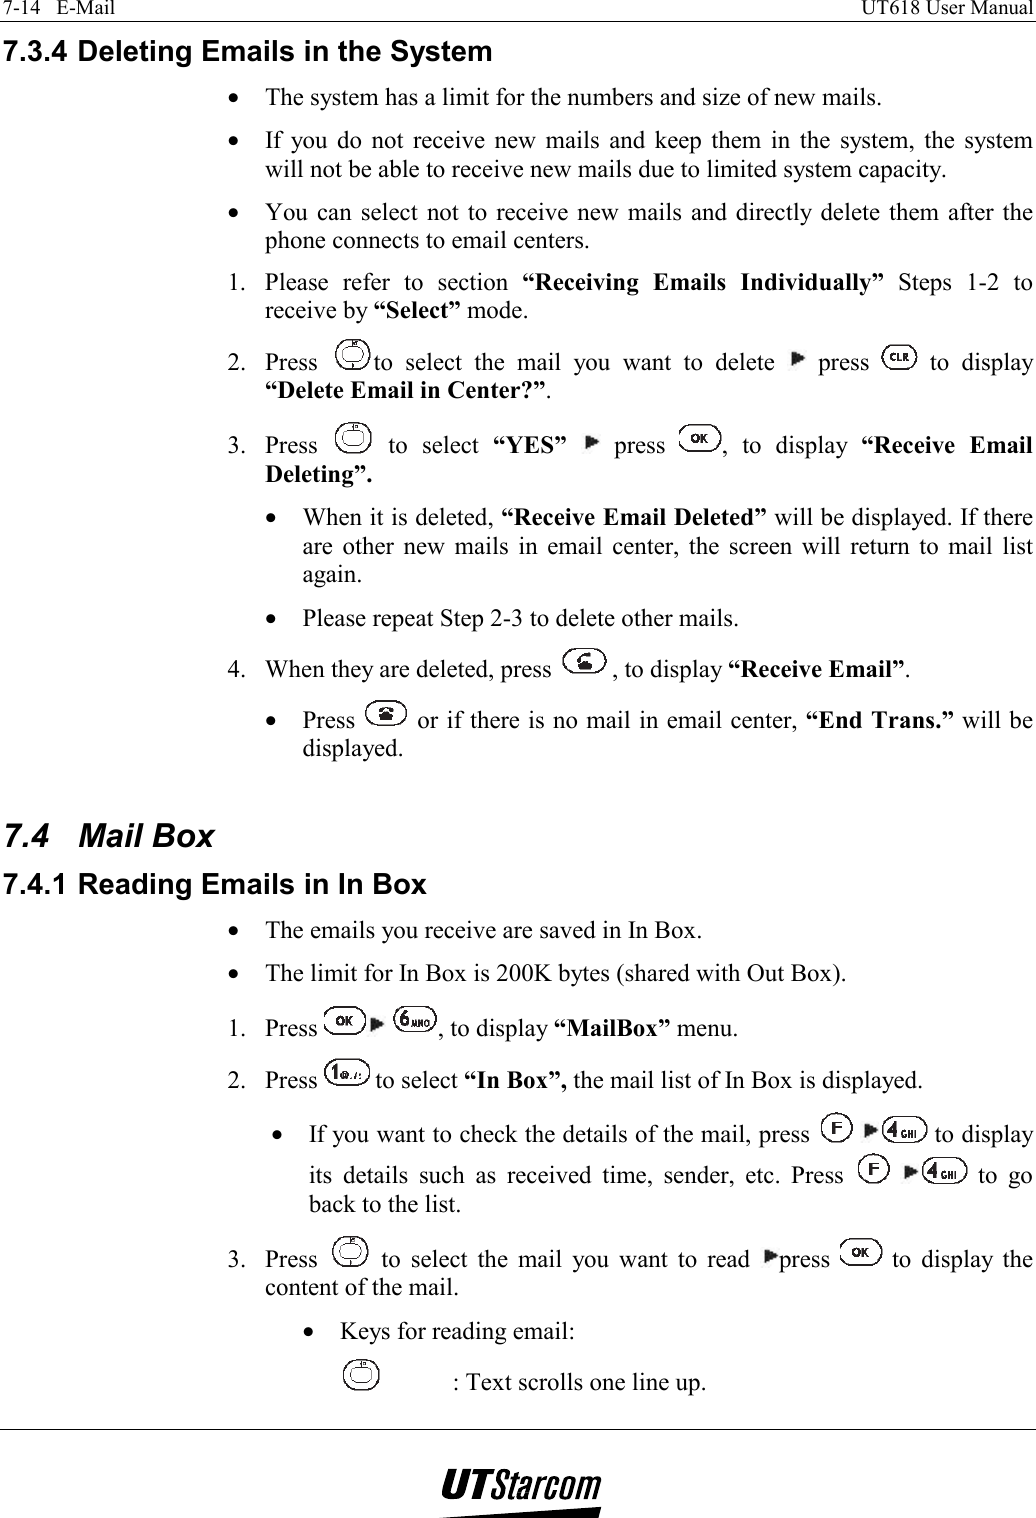 7-14   E-Mail    UT618 User Manual   7.3.4 Deleting Emails in the System •  The system has a limit for the numbers and size of new mails. •  If you do not receive new mails and keep them in the system, the system will not be able to receive new mails due to limited system capacity. •  You can select not to receive new mails and directly delete them after the phone connects to email centers. 1.  Please refer to section “Receiving Emails Individually” Steps 1-2 to receive by “Select” mode. 2. Press  to select the mail you want to delete   press   to display “Delete Email in Center?”. 3. Press   to select “YES”  press  , to display “Receive Email Deleting”. •  When it is deleted, “Receive Email Deleted” will be displayed. If there are other new mails in email center, the screen will return to mail list again. •  Please repeat Step 2-3 to delete other mails. 4.  When they are deleted, press  , to display “Receive Email”. •  Press   or if there is no mail in email center, “End Trans.” will be displayed.  7.4 Mail Box 7.4.1 Reading Emails in In Box •  The emails you receive are saved in In Box. •  The limit for In Box is 200K bytes (shared with Out Box). 1. Press   , to display “MailBox” menu.   2. Press   to select “In Box”, the mail list of In Box is displayed. •  If you want to check the details of the mail, press    to display its details such as received time, sender, etc. Press    to go back to the list. 3. Press   to select the mail you want to read  press   to display the content of the mail. •  Keys for reading email:   : Text scrolls one line up. 